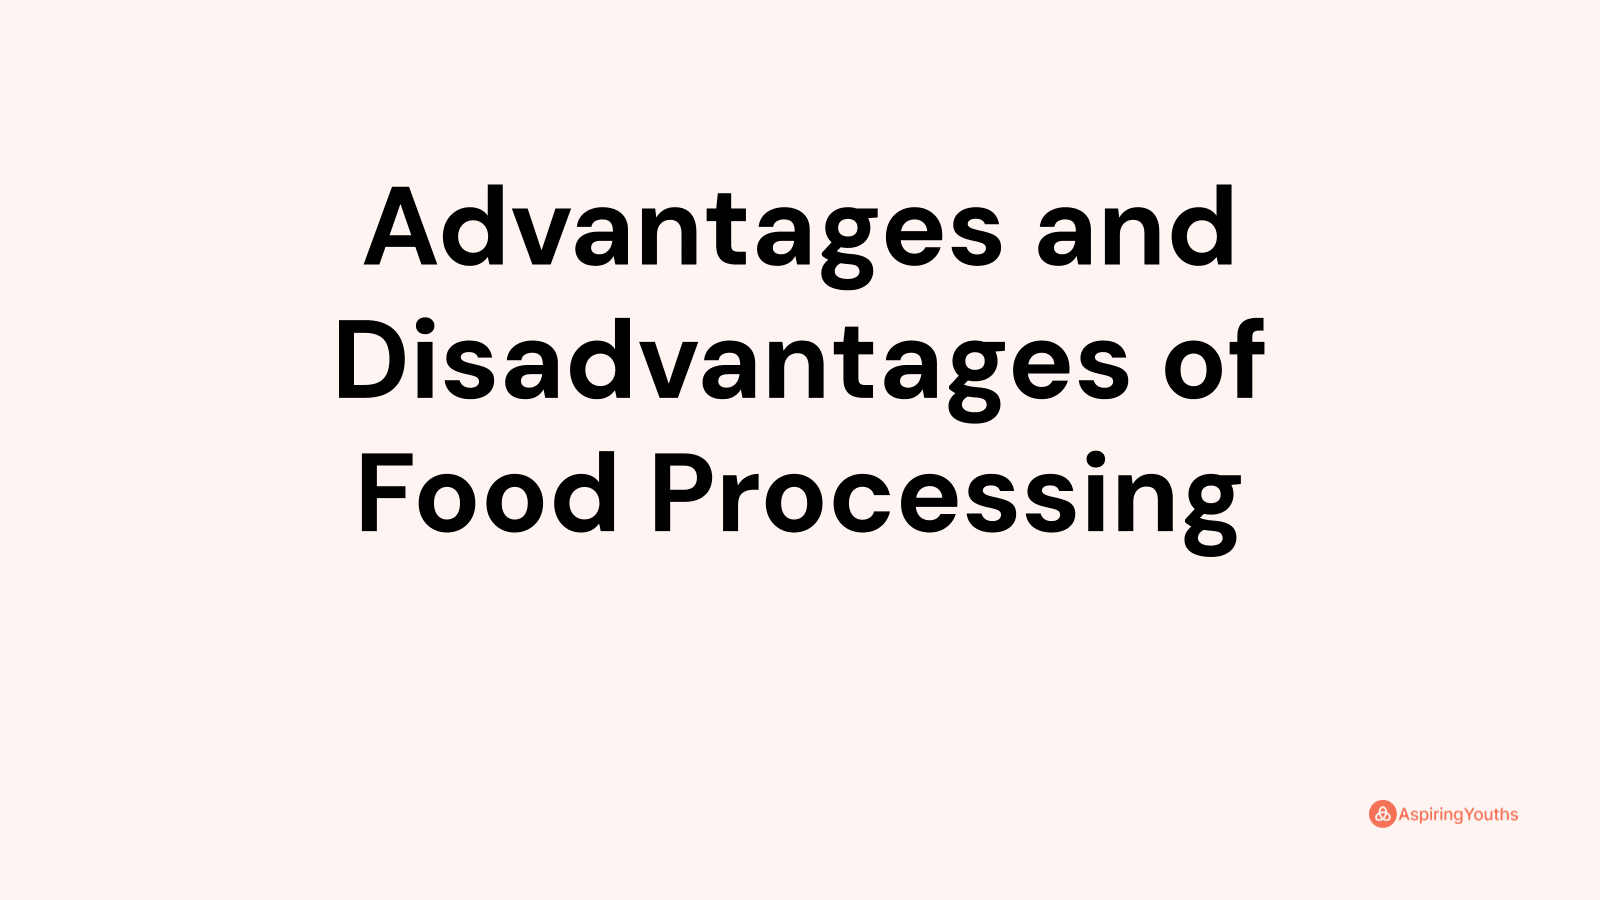 Advantages and disadvantages of Food Processing